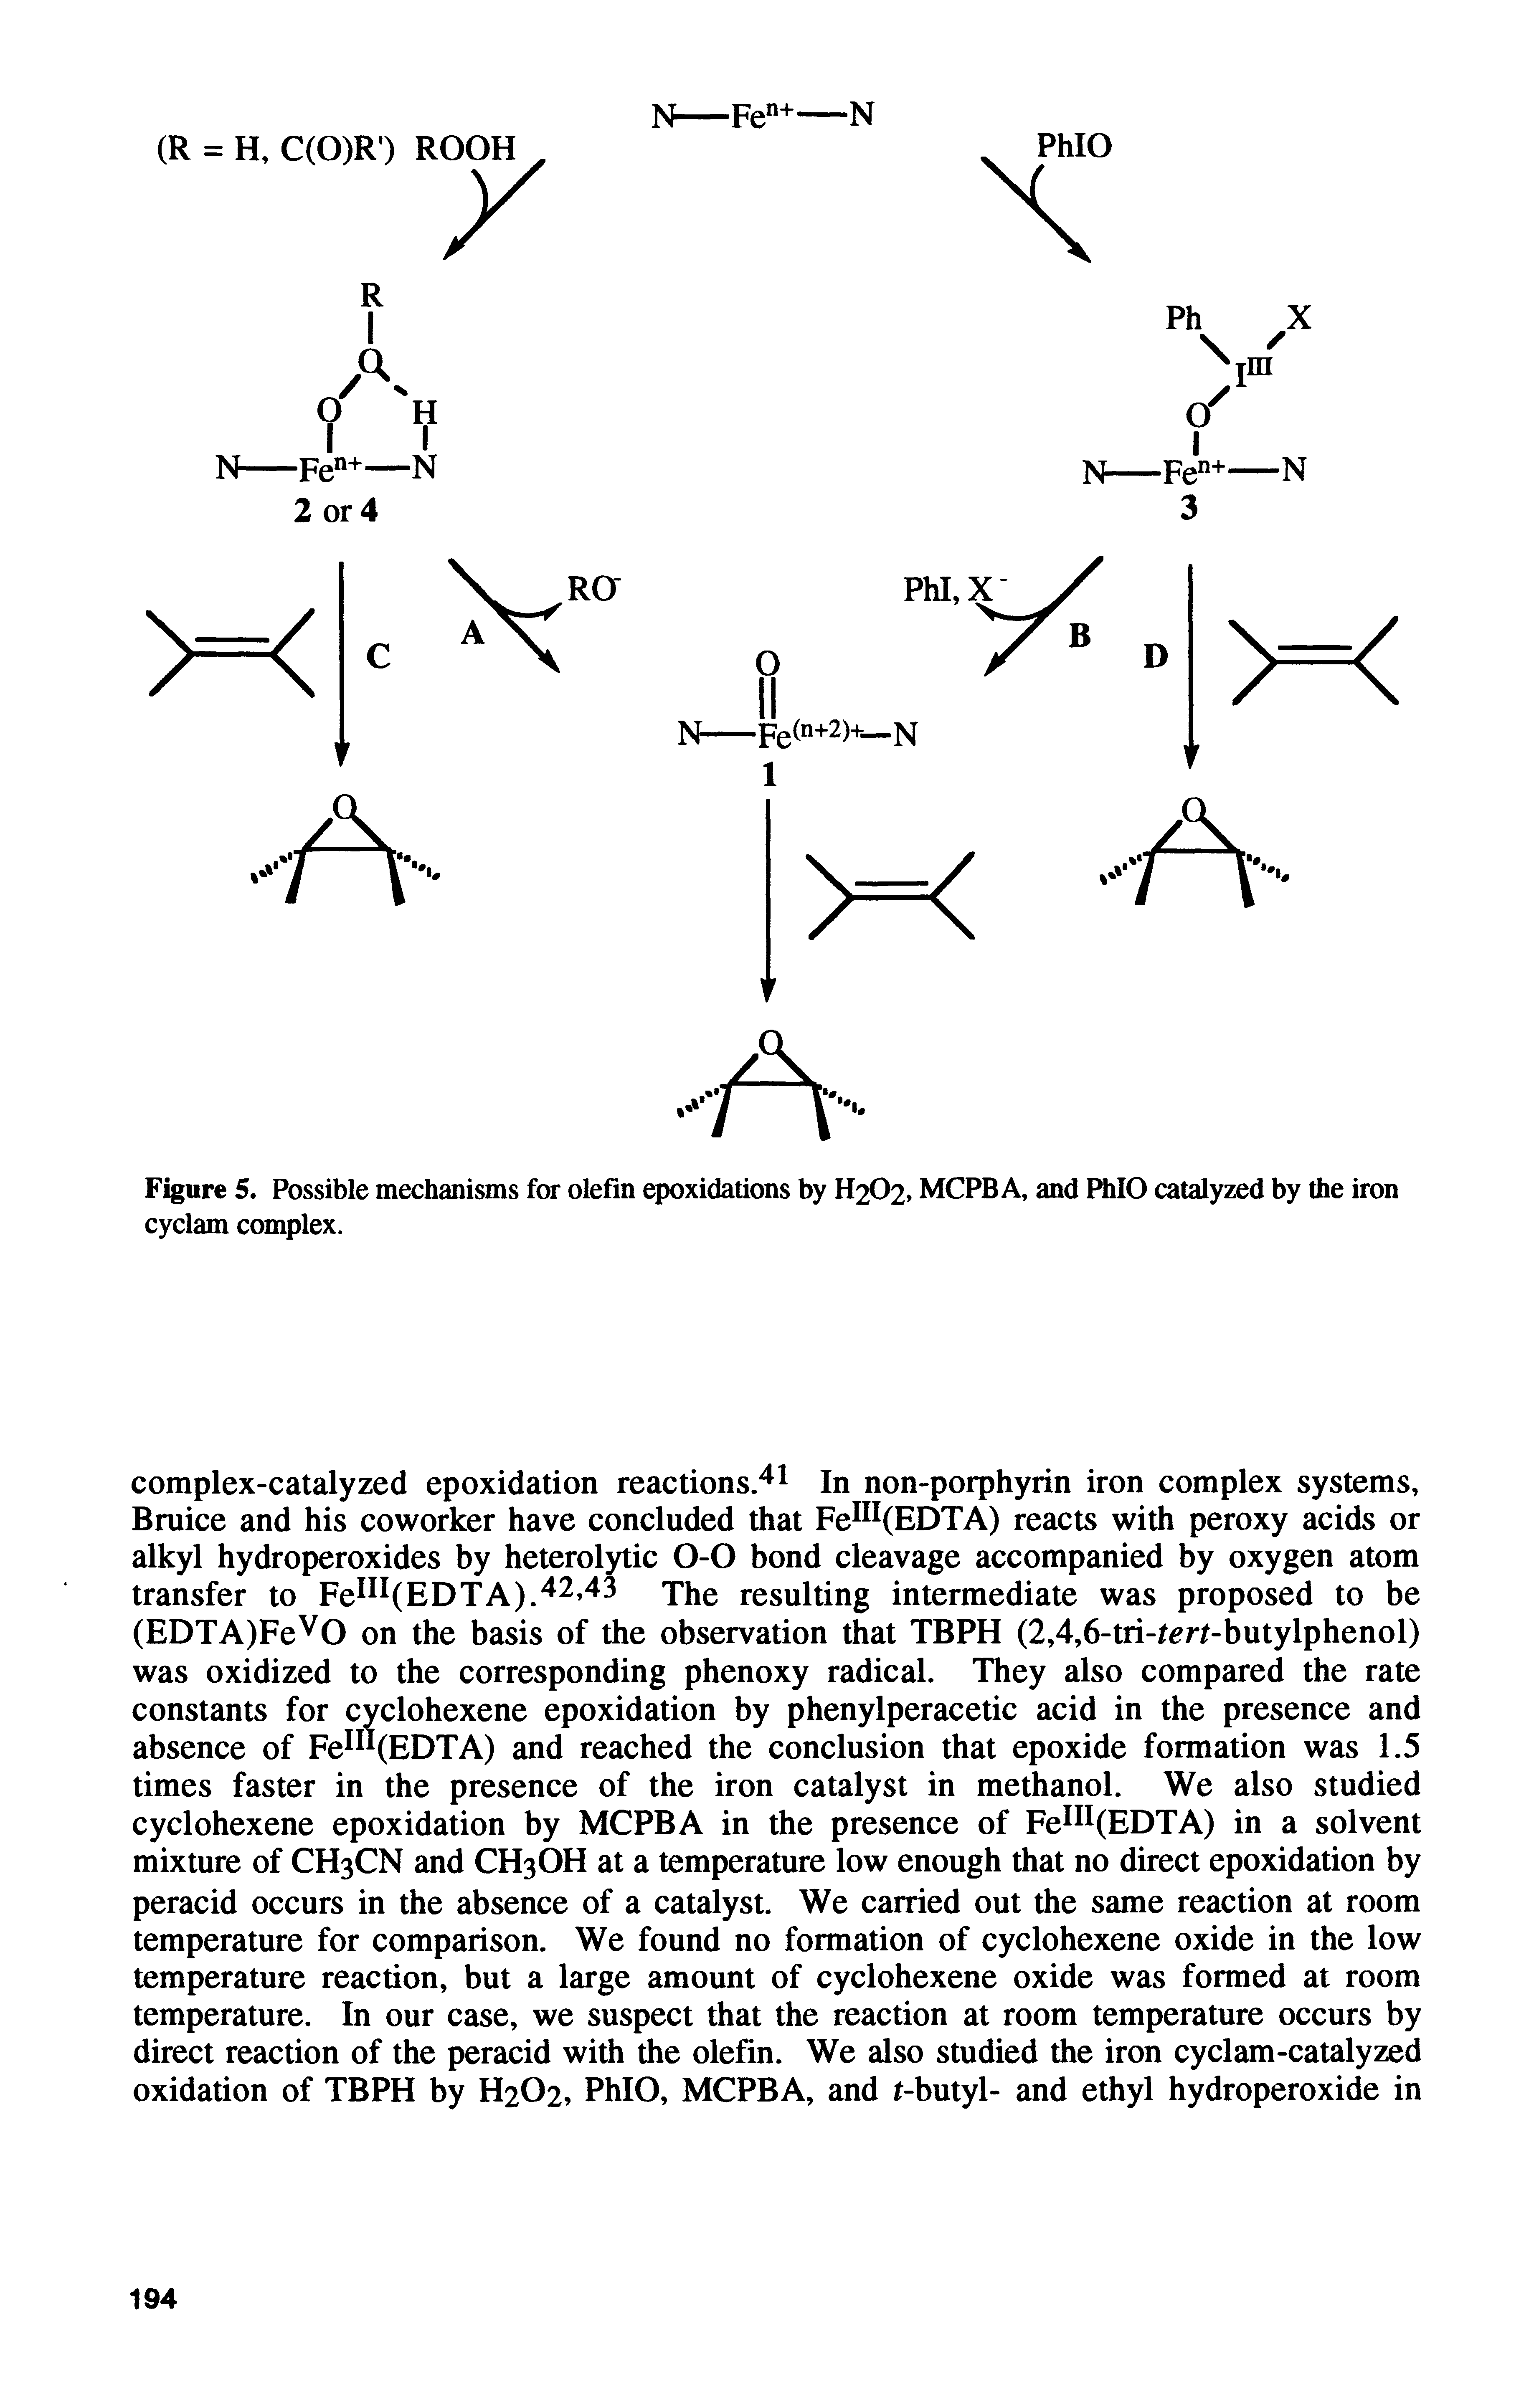 Figure 5. Possible mechanisms for olefin epoxidations by H2O2, MCPB A, and PhIO catalyzed by the iron cyclam complex.